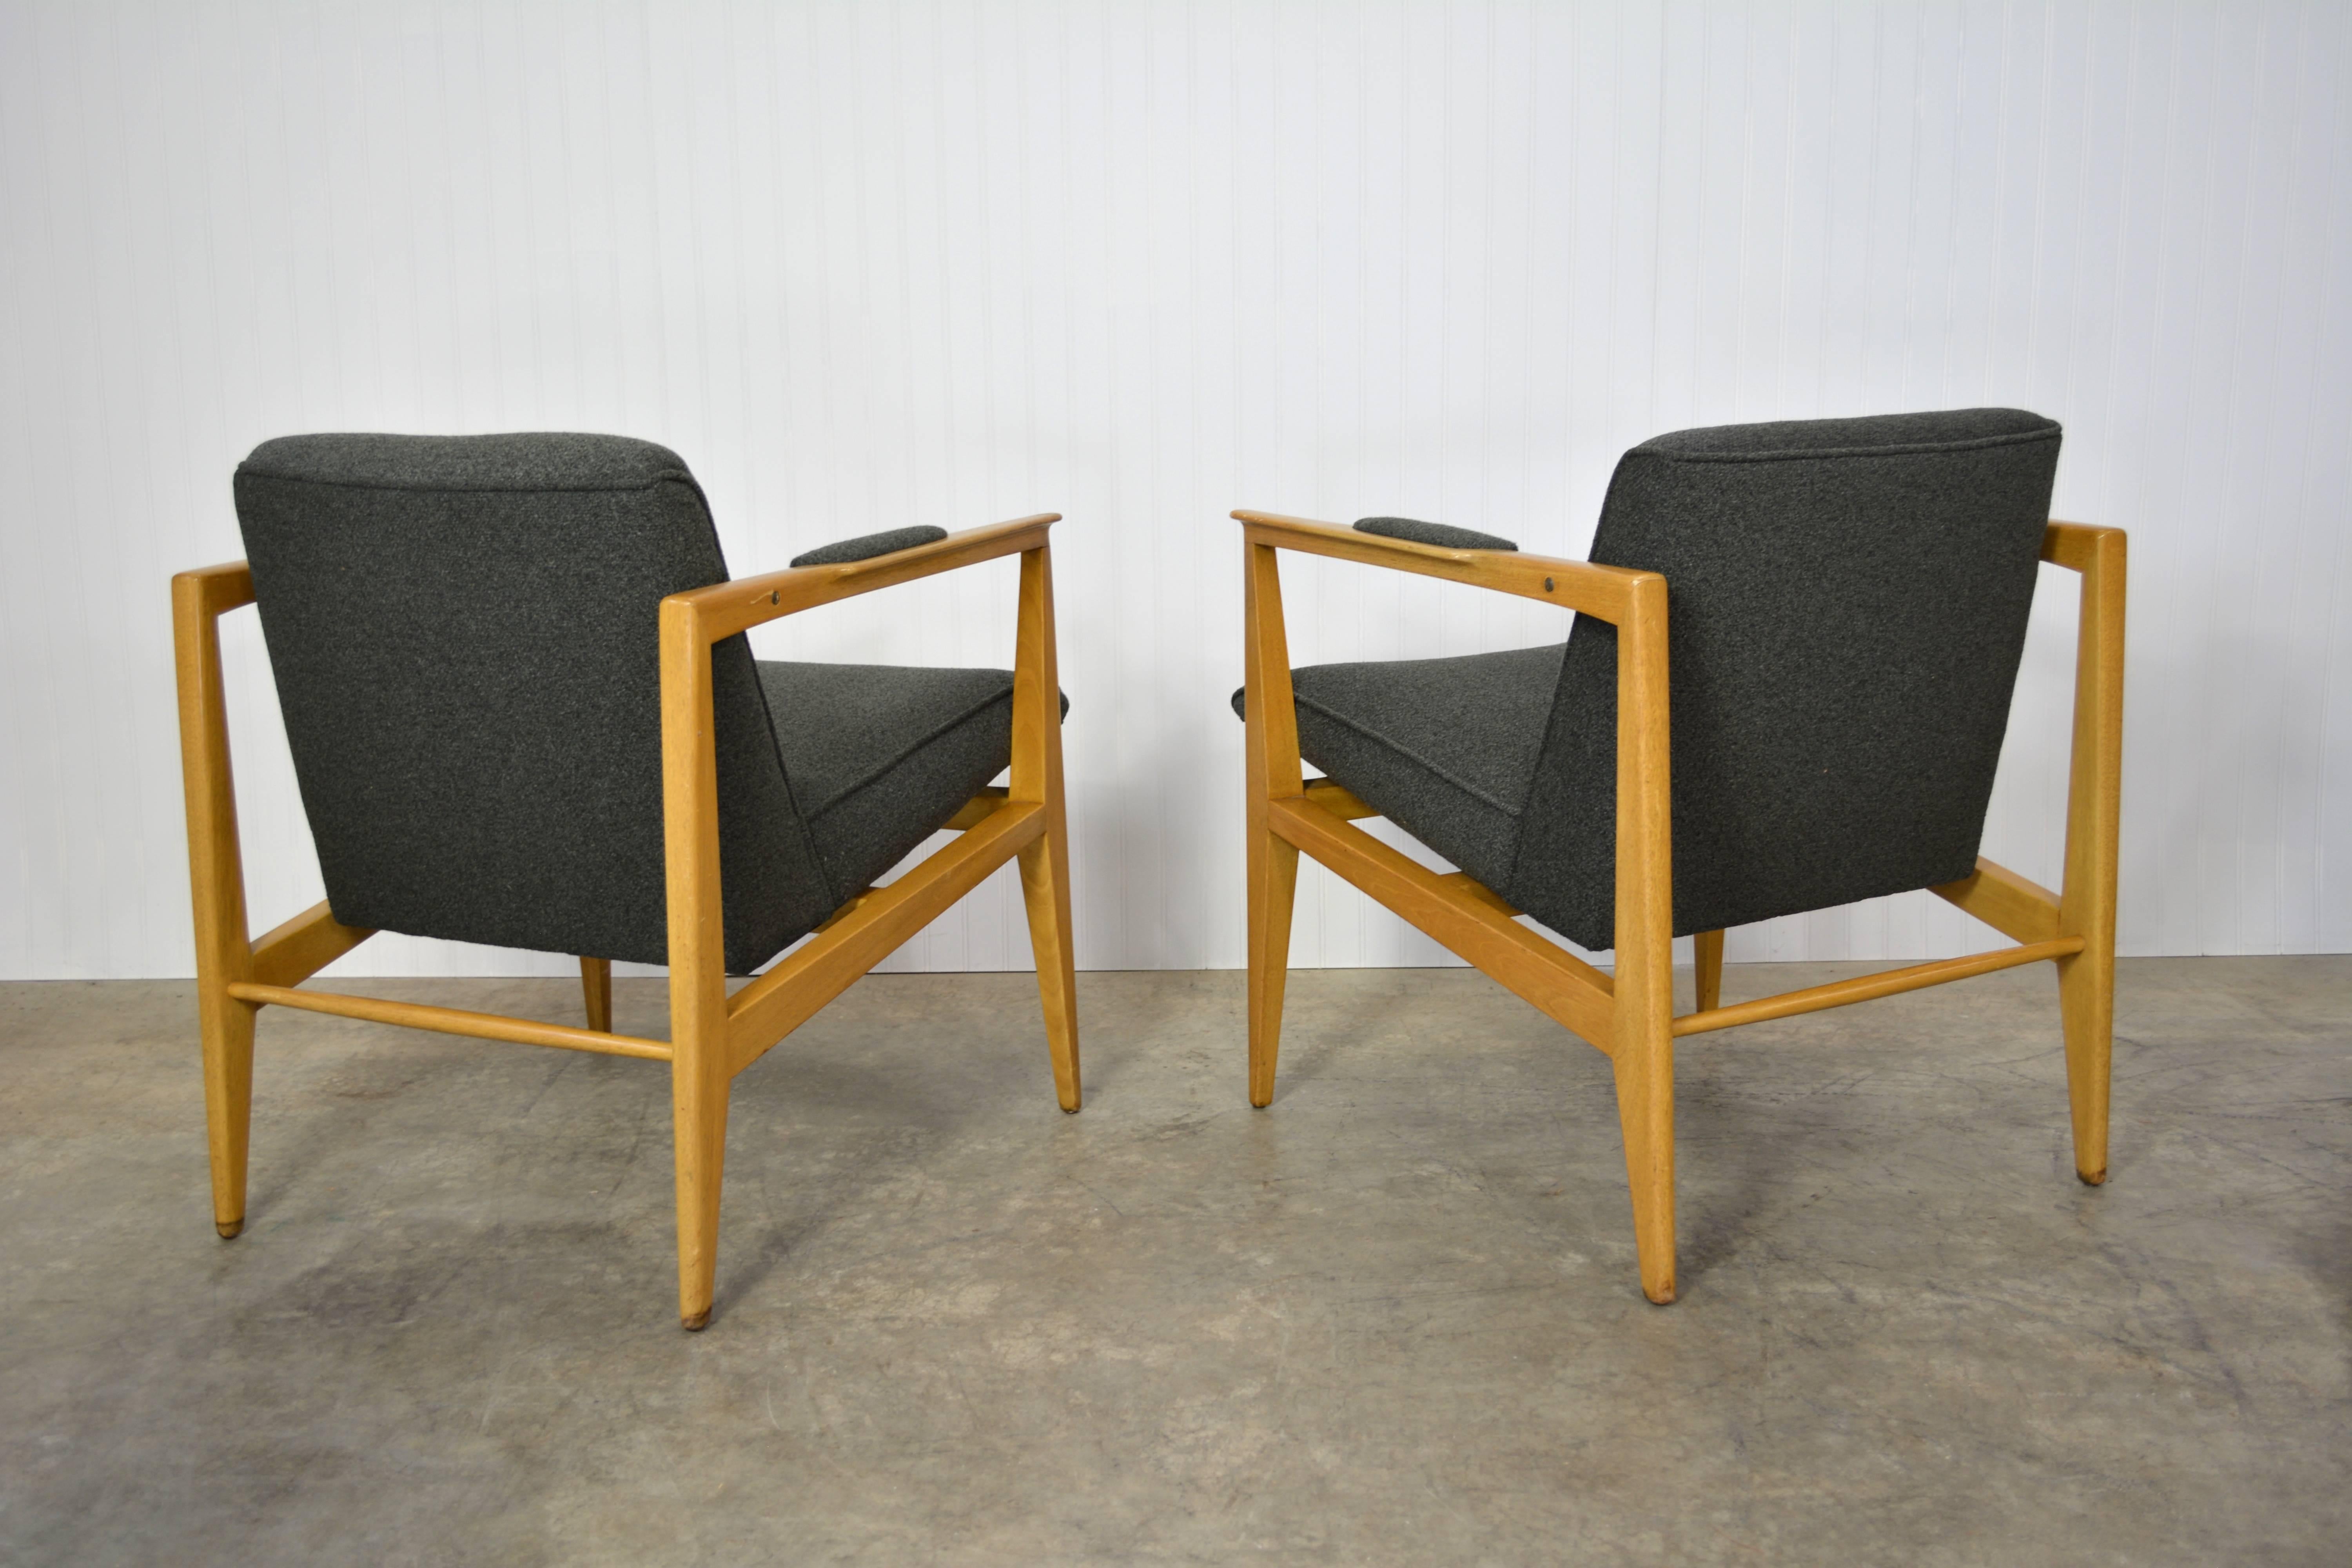 Edward Wormley Lounge Chairs for Dunbar In Excellent Condition For Sale In Loves Park, IL